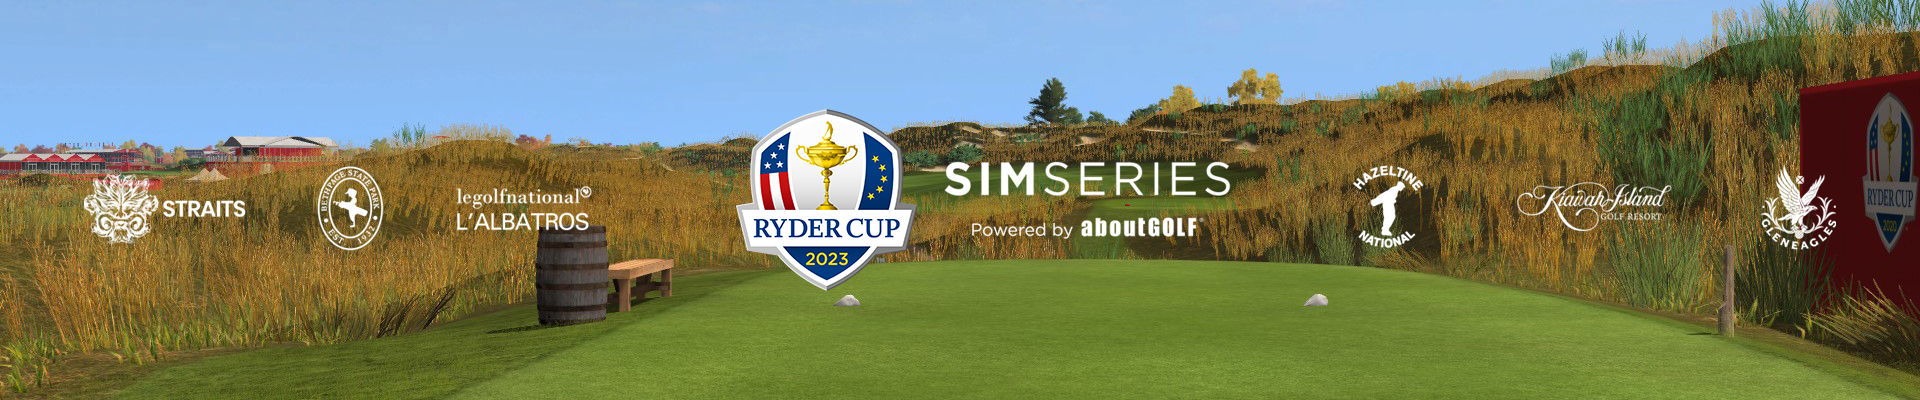 Whistling Straits 2020 Ryder Cup